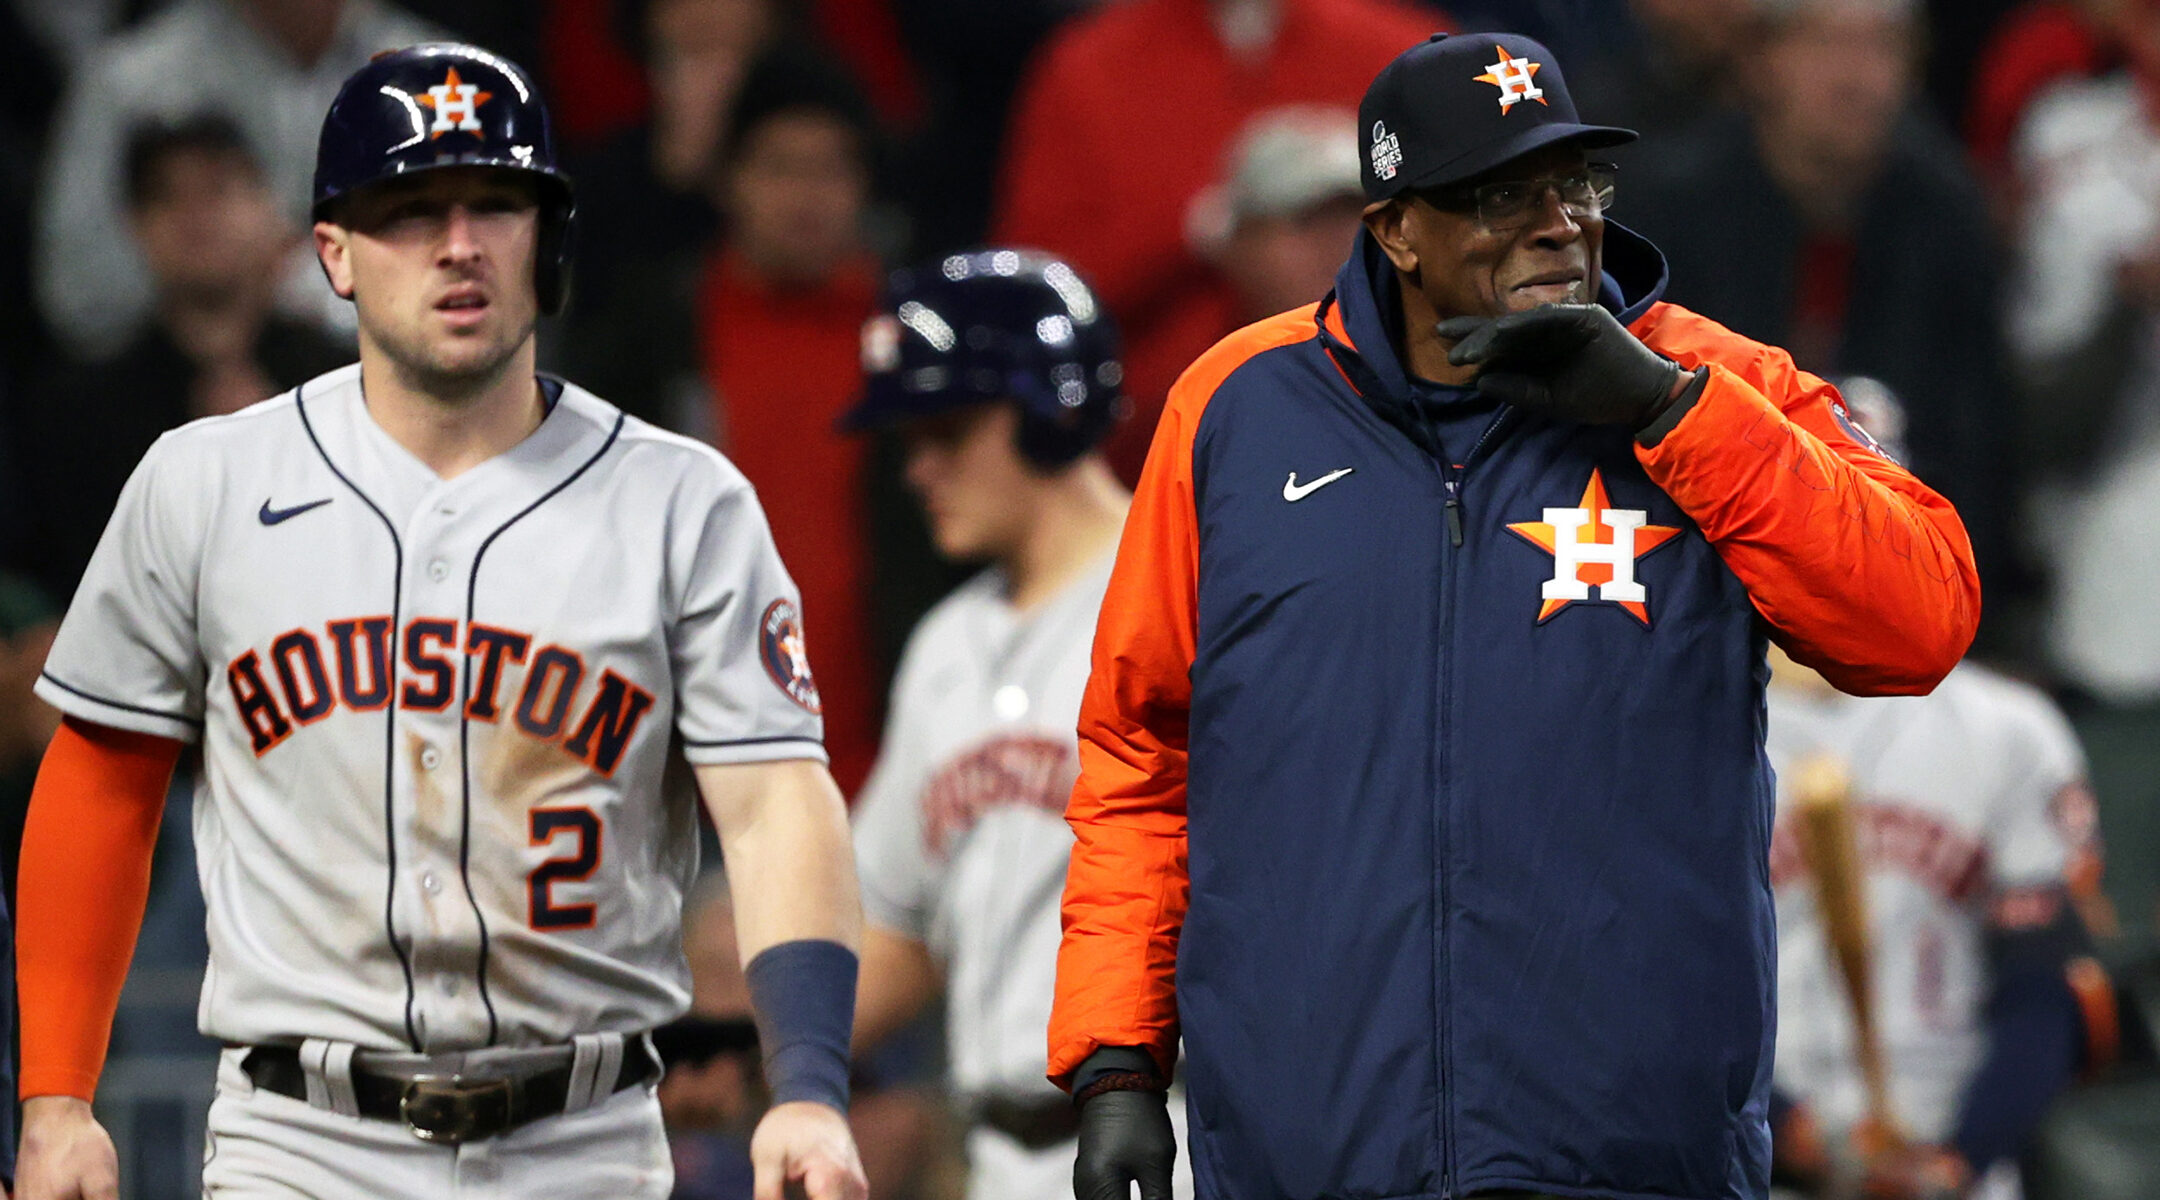 Astros manager Dusty Baker hopes matzah ball soup will give his